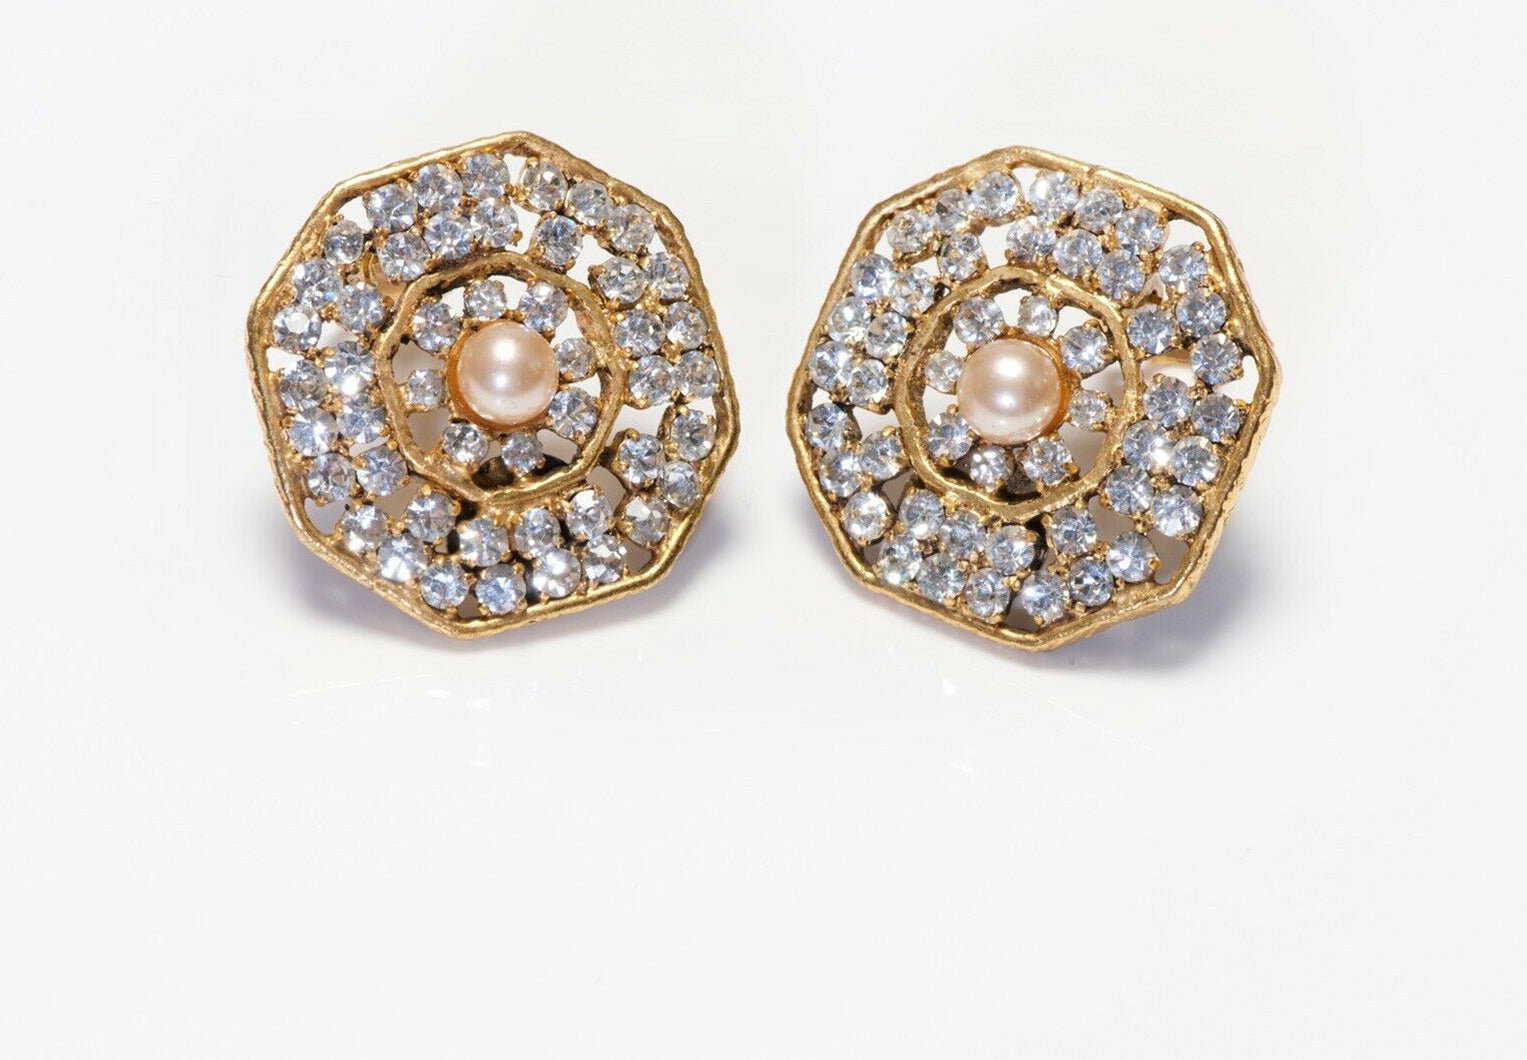 CHANEL 1970’s Octagonal Crystal Brown Pearl Earrings - DSF Antique Jewelry